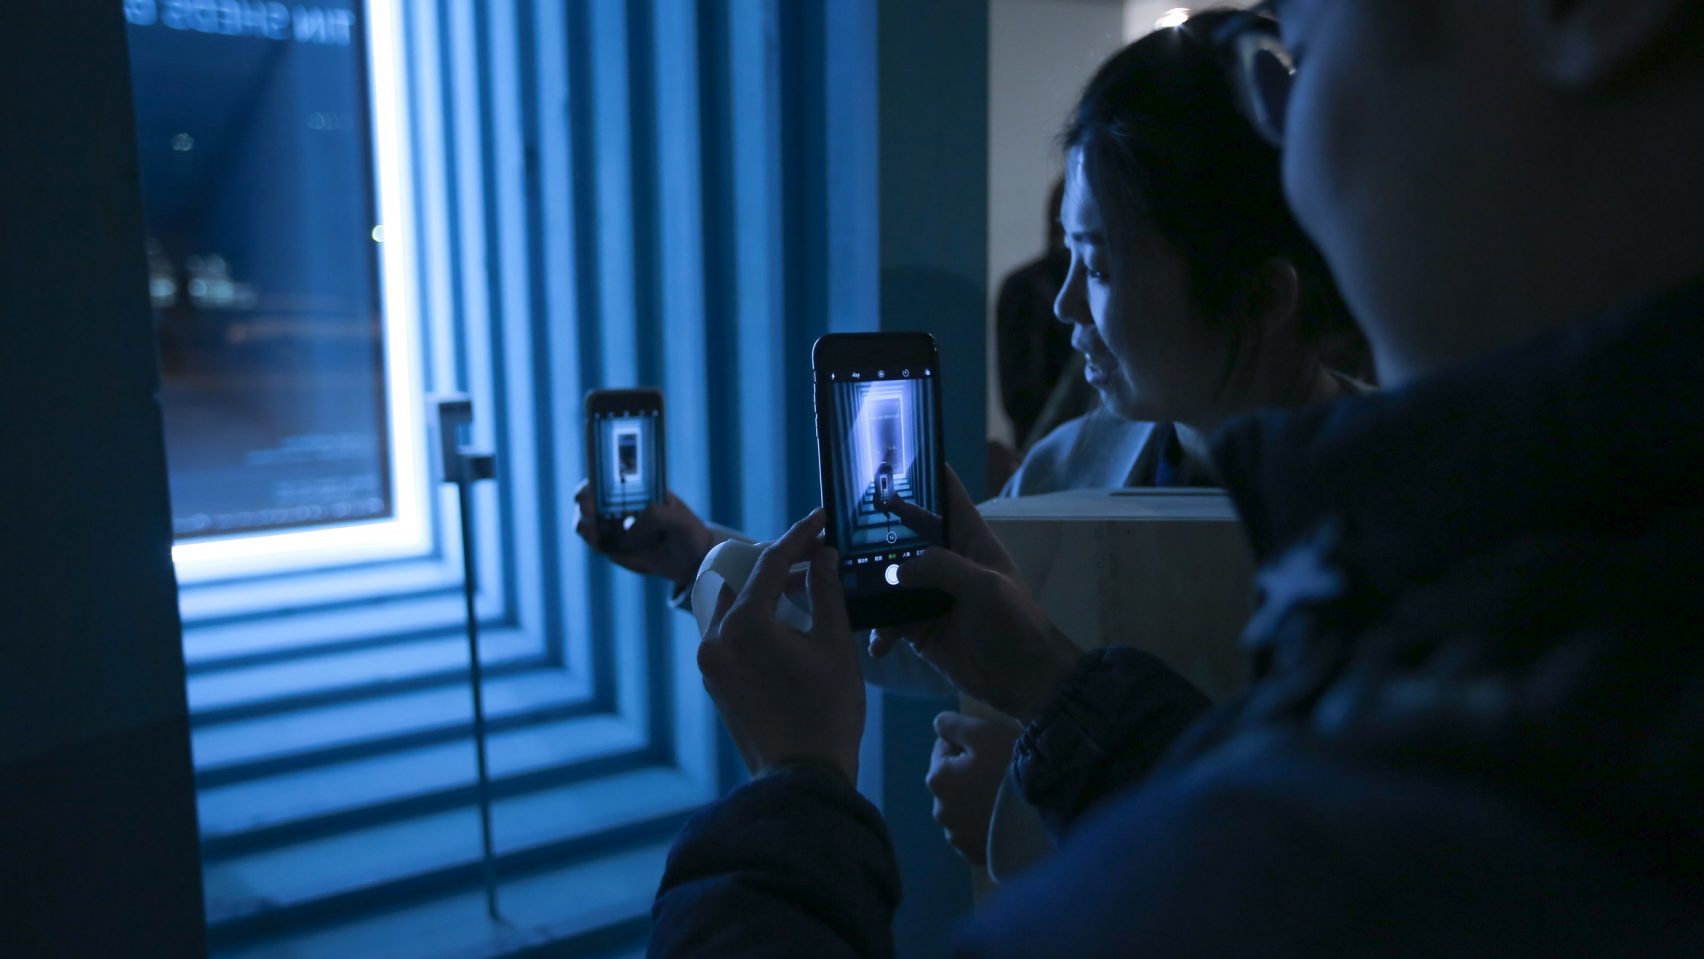 Viewers looking at mobile phones in a blue lightbox